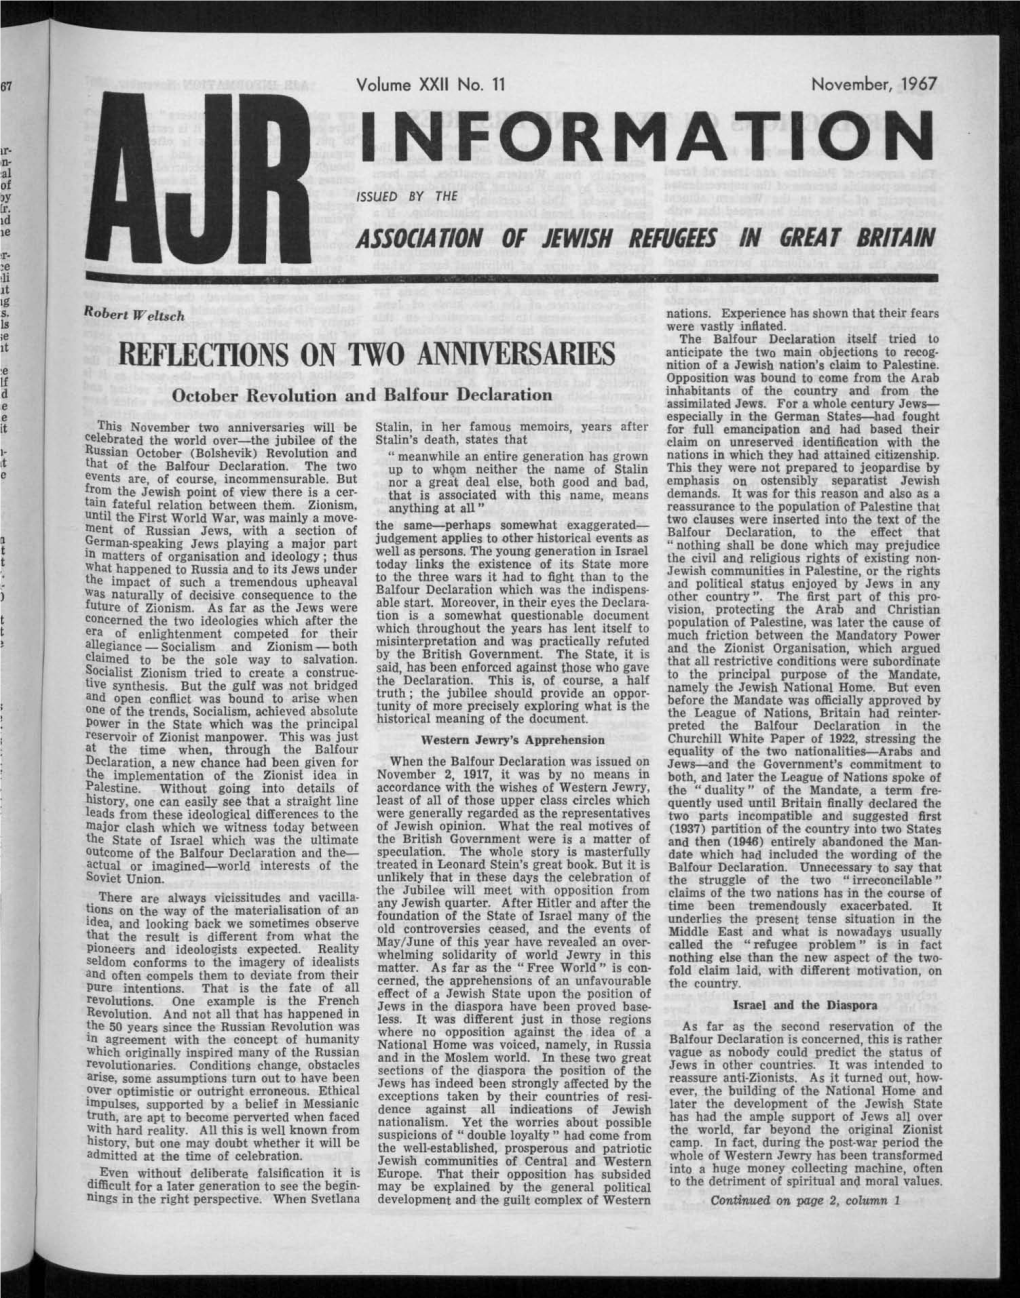 AJR INFORMATION November, 1967 Ary Episode of the " Volunteers " Such Factors REFLECTIONS on TWO ANNIVERSARIES Have Come to Light